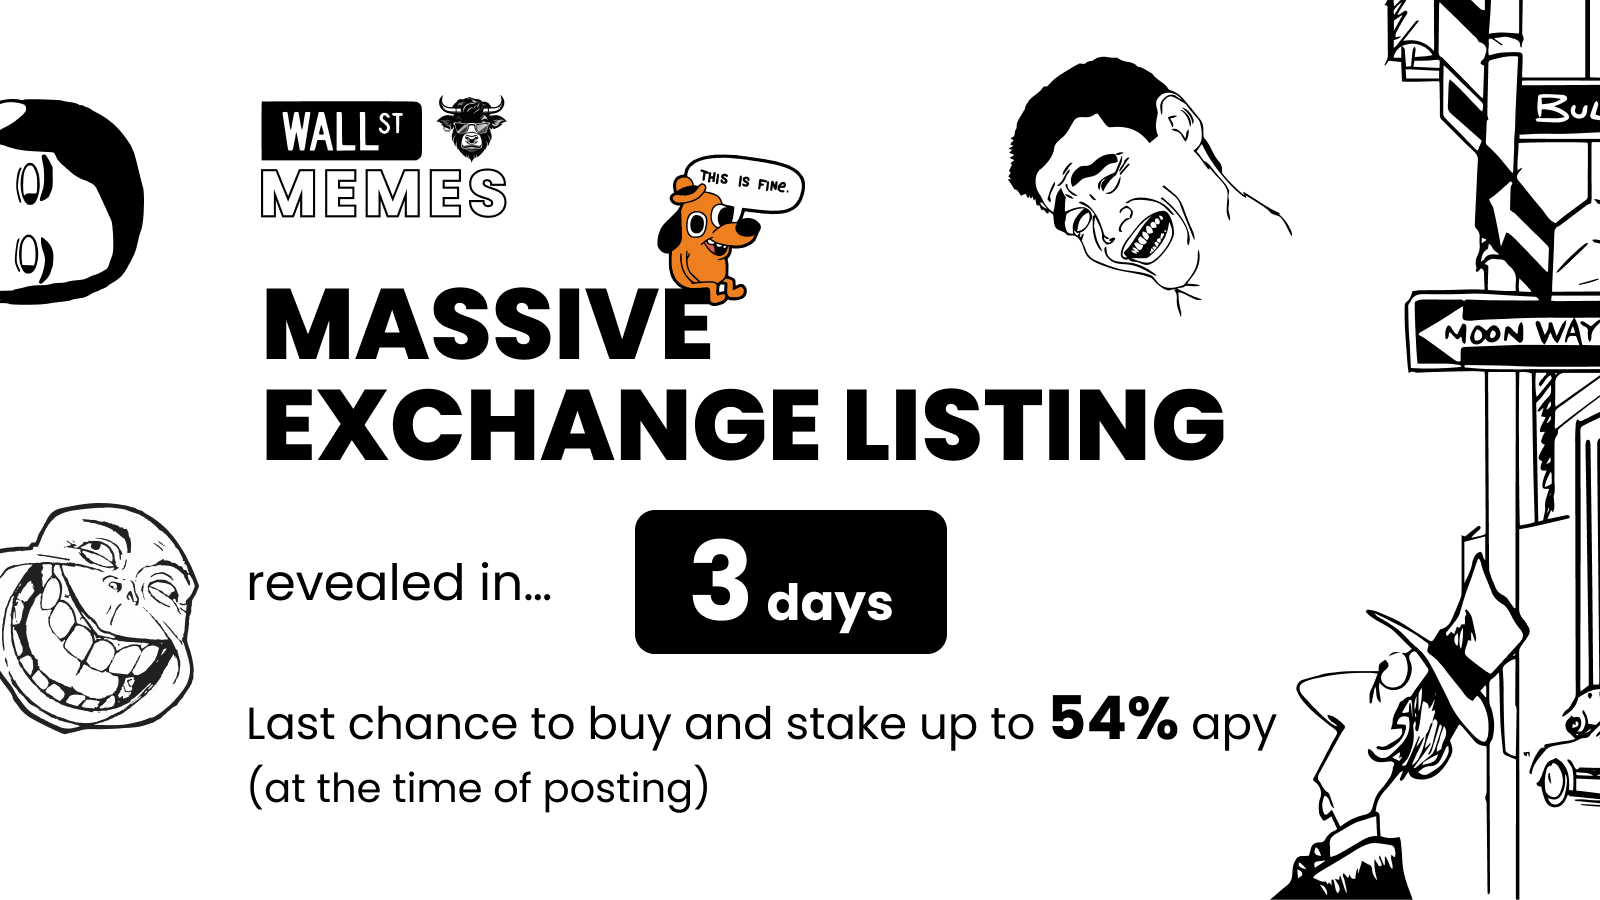 Wall Street Meme 3 days to go to massive exchange listing